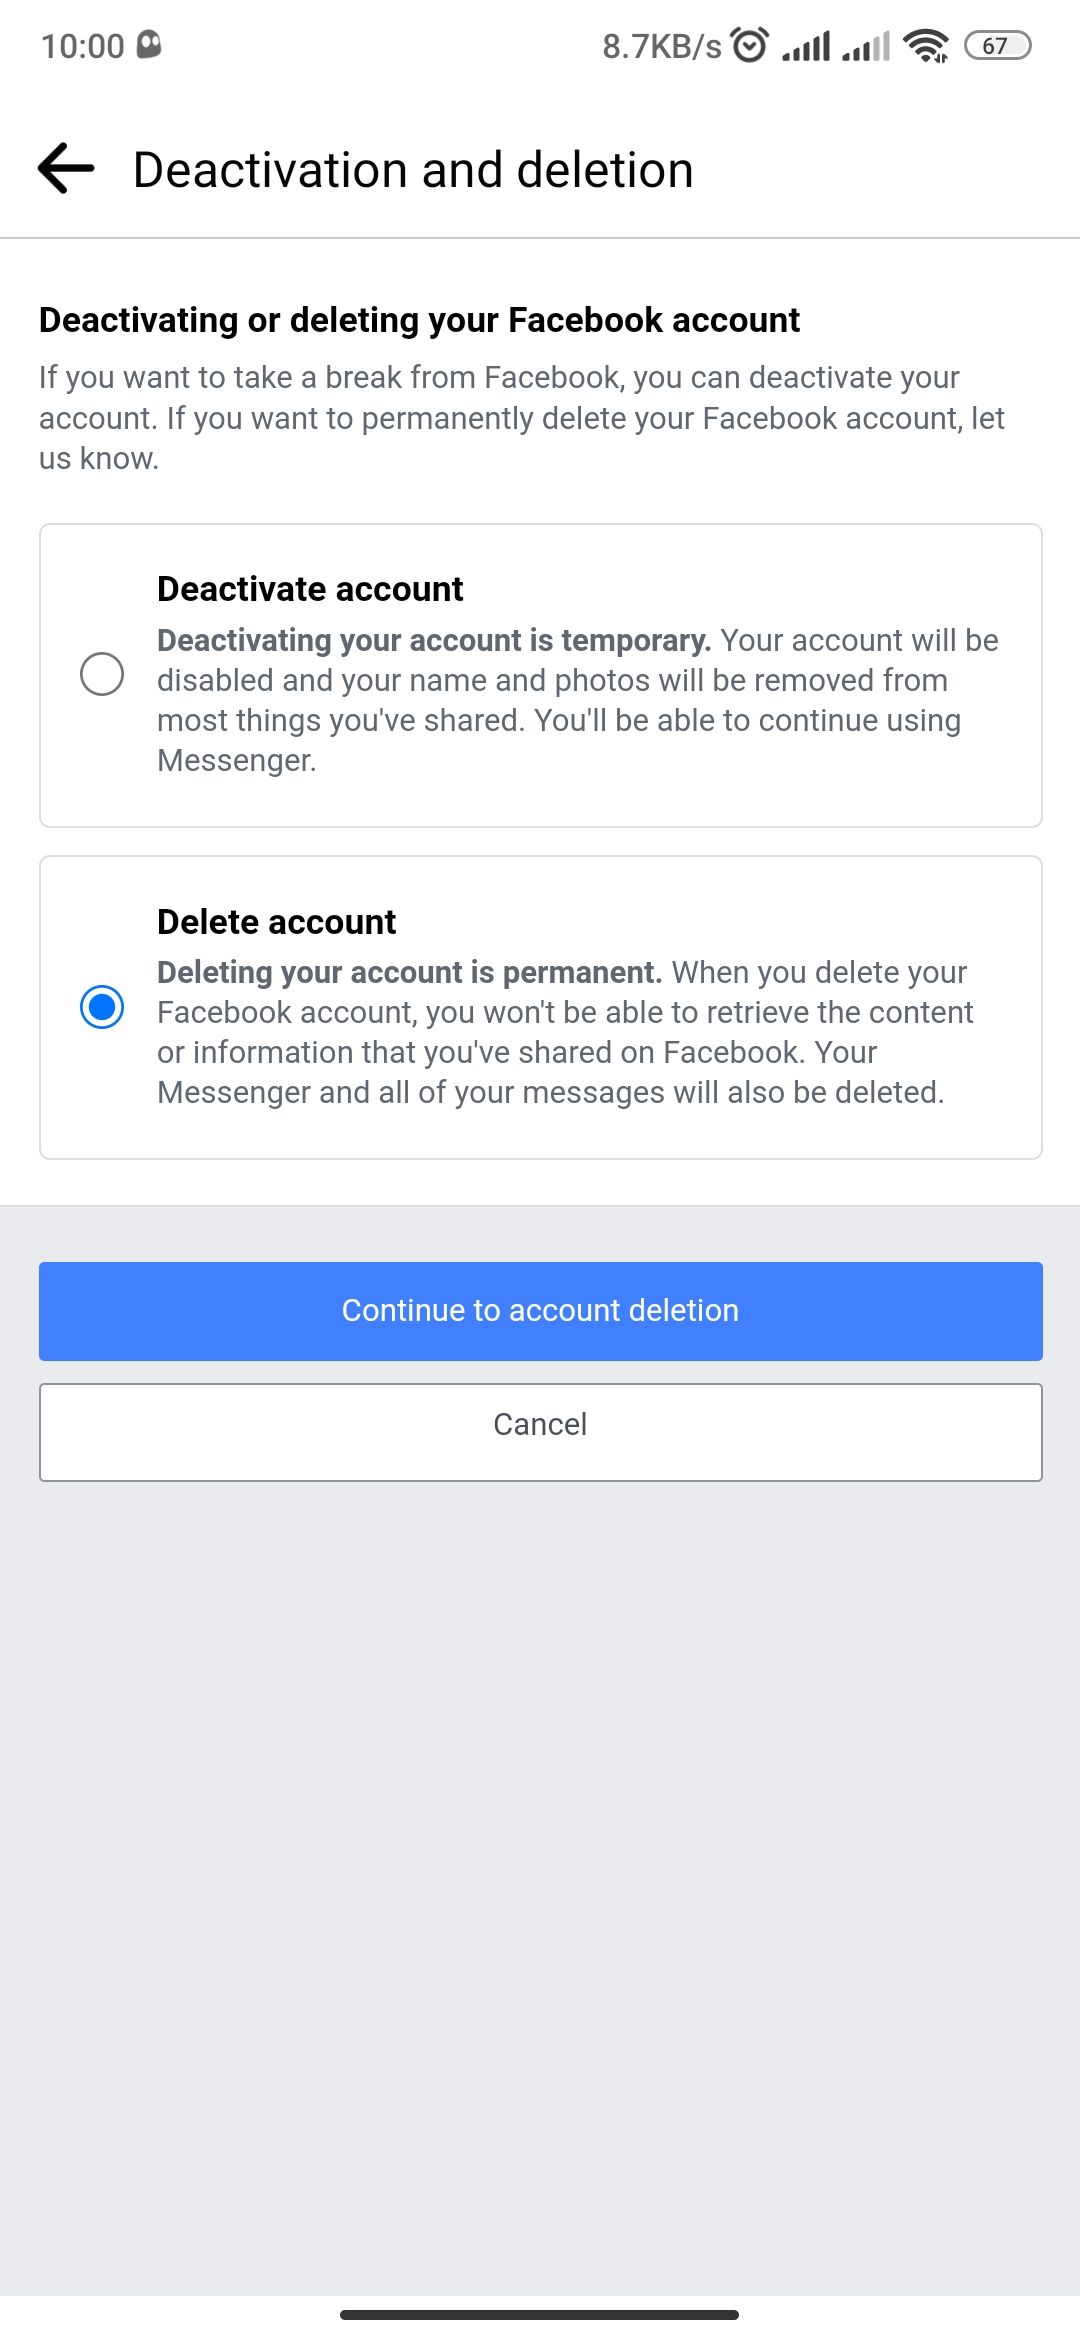 Facebook account deletion and deactivation page on Android